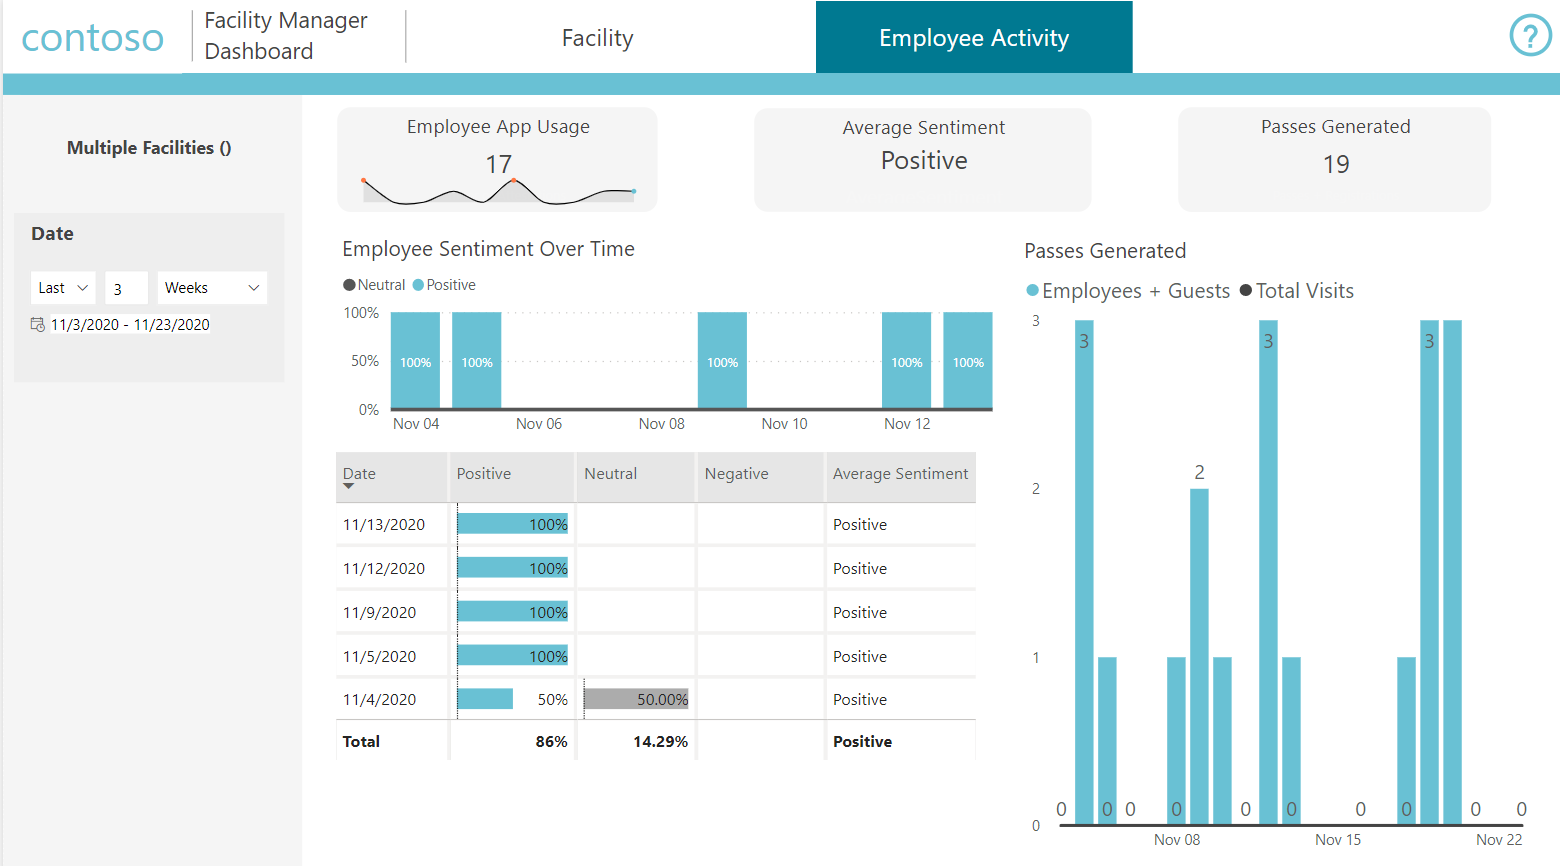 Facility manager dashboard - Employee activity.